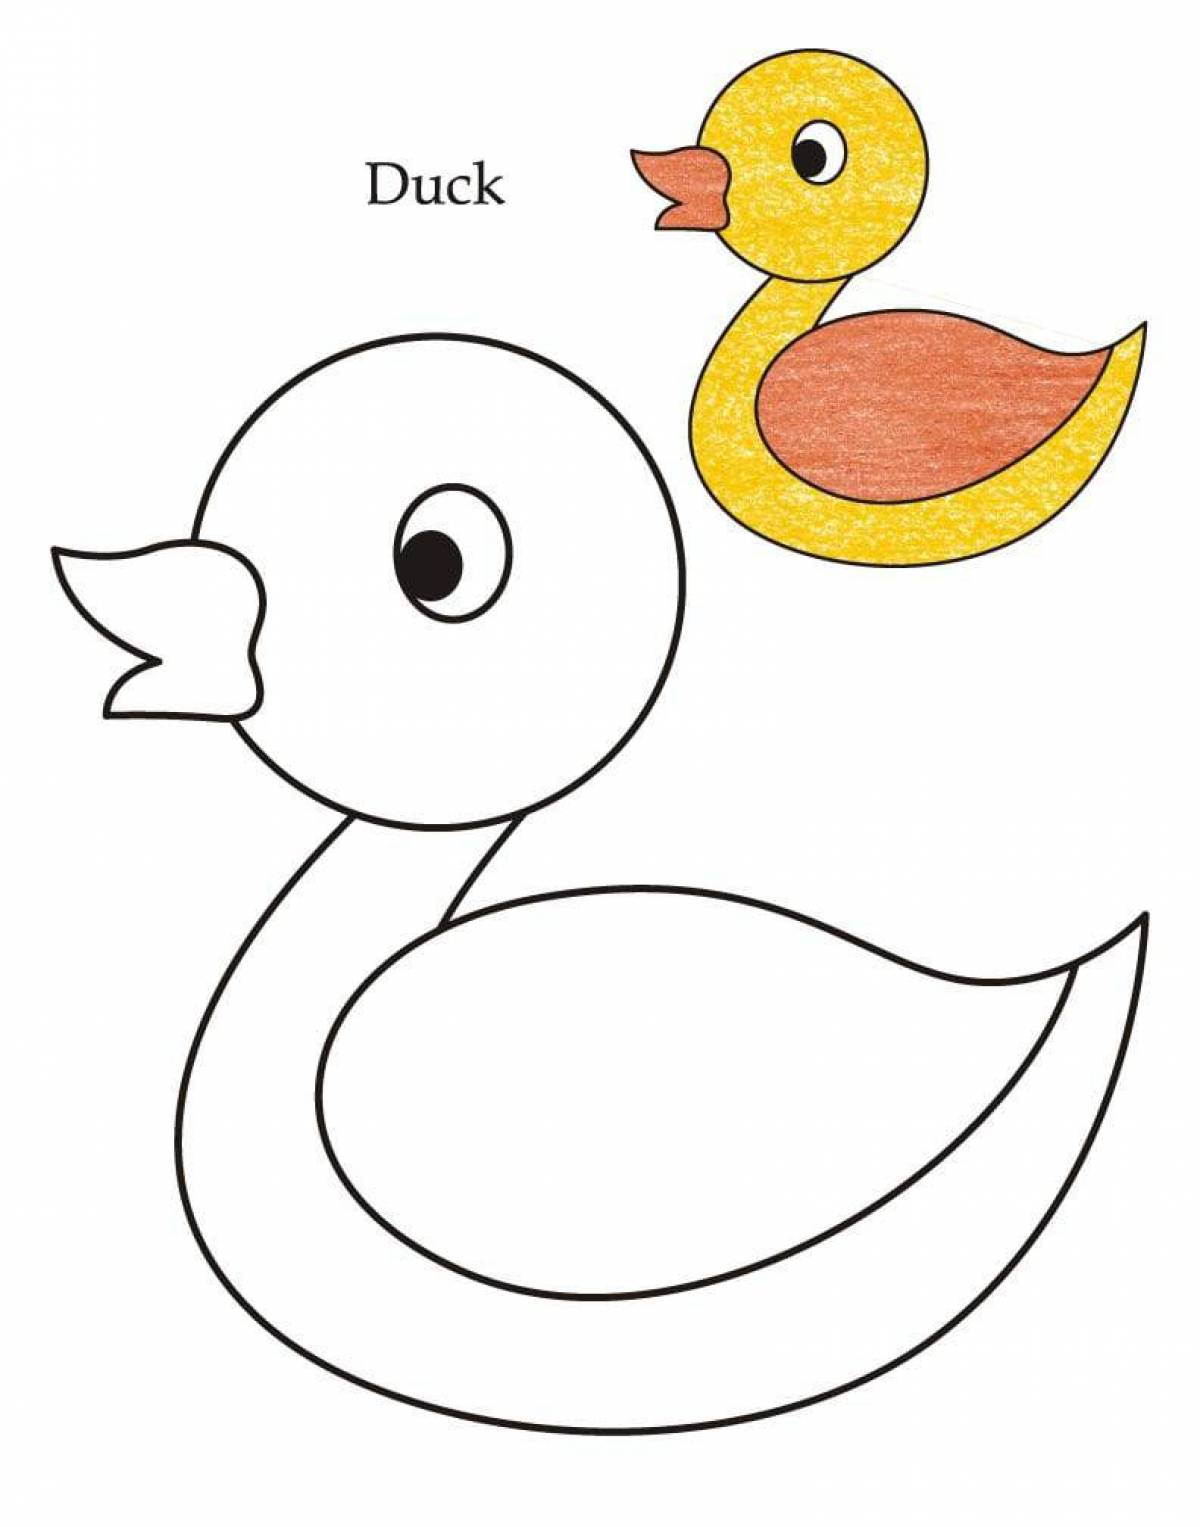 Animated duckling coloring page for kids